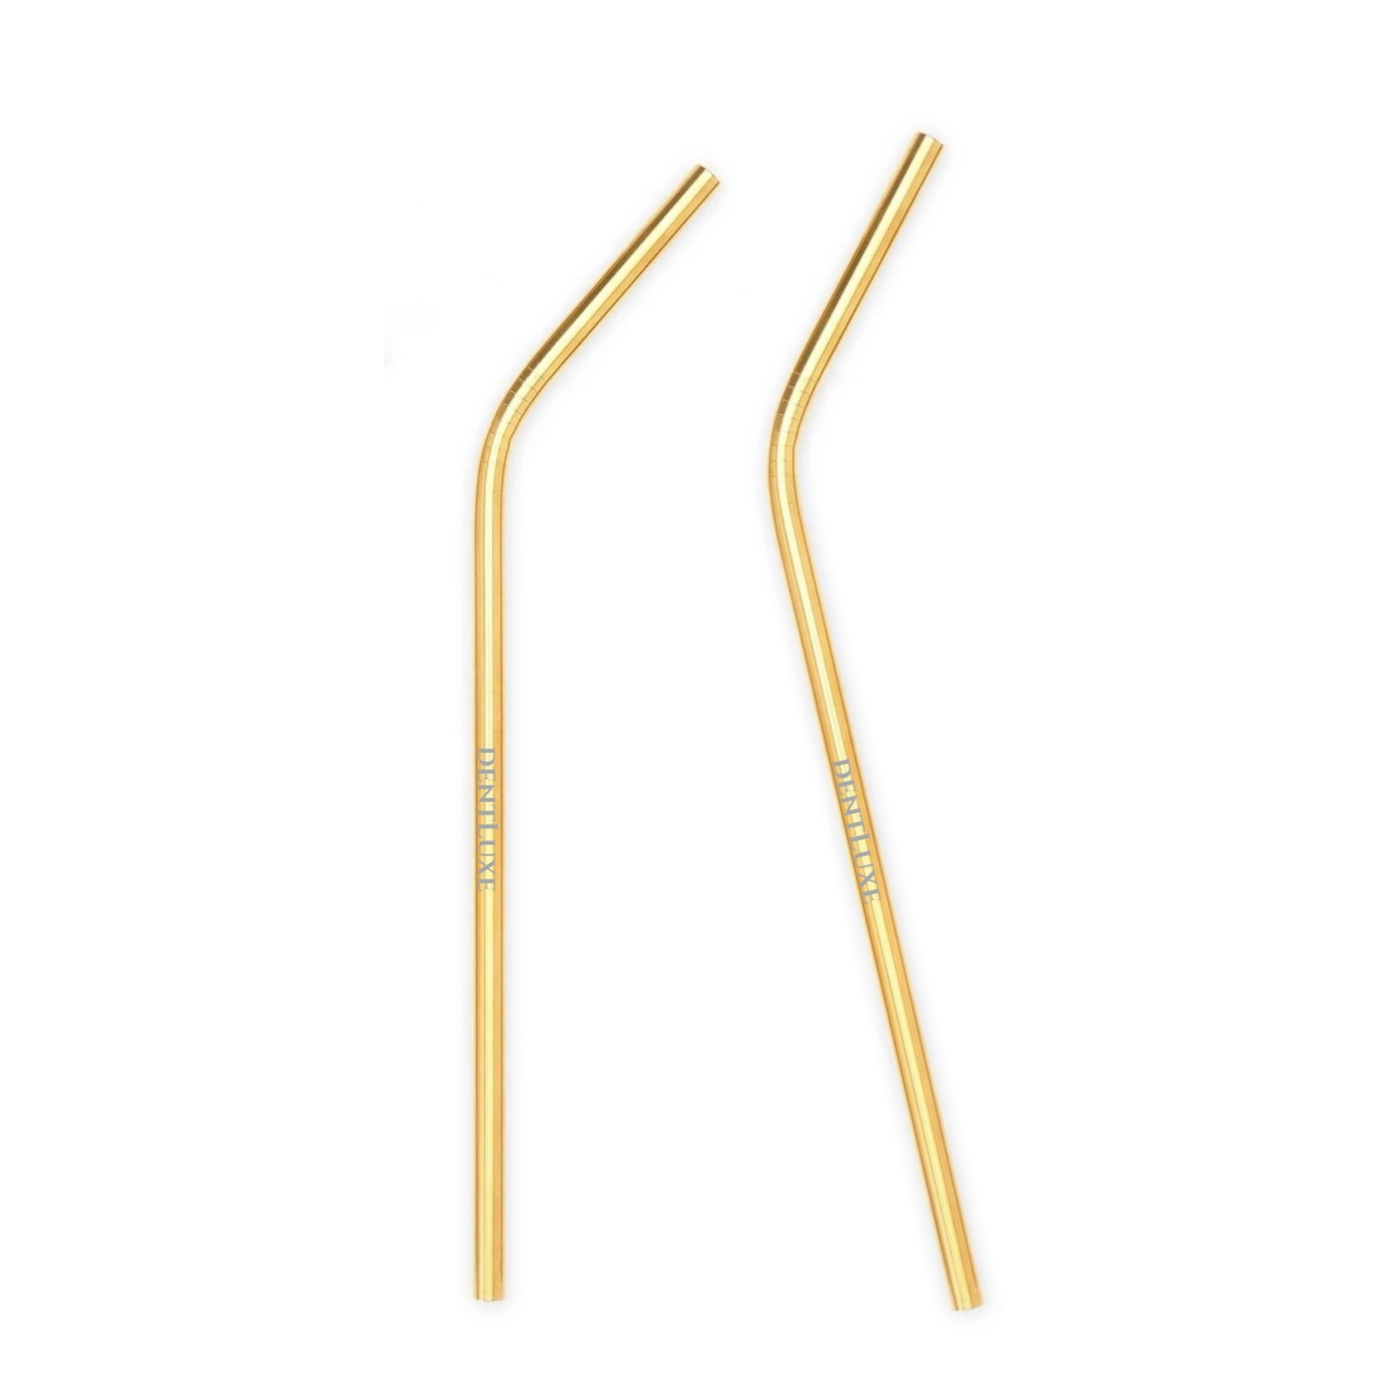 Gold Stainless Steel Straw - Metal Reusable Straws - Dentluxe 